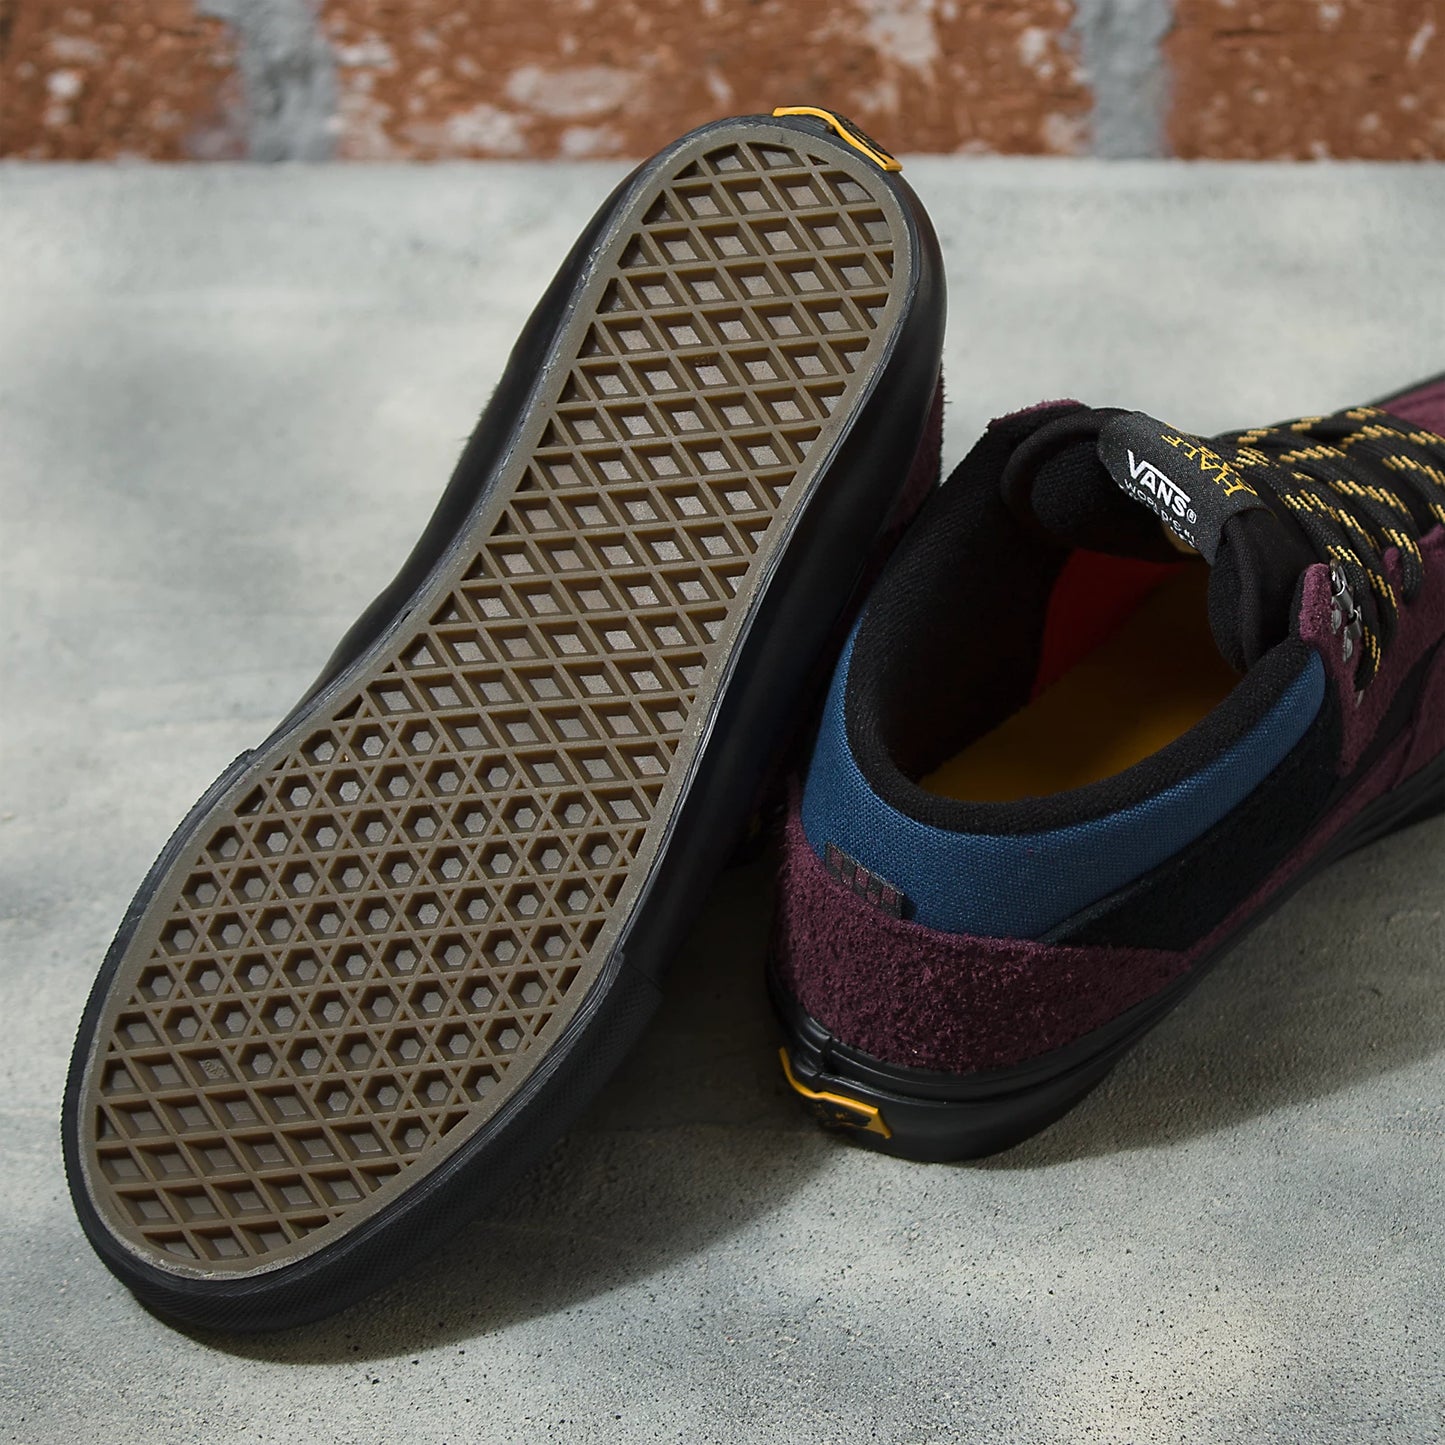 Outdoor Skate Half Cab Shoe Purp/Blk(size options listed)